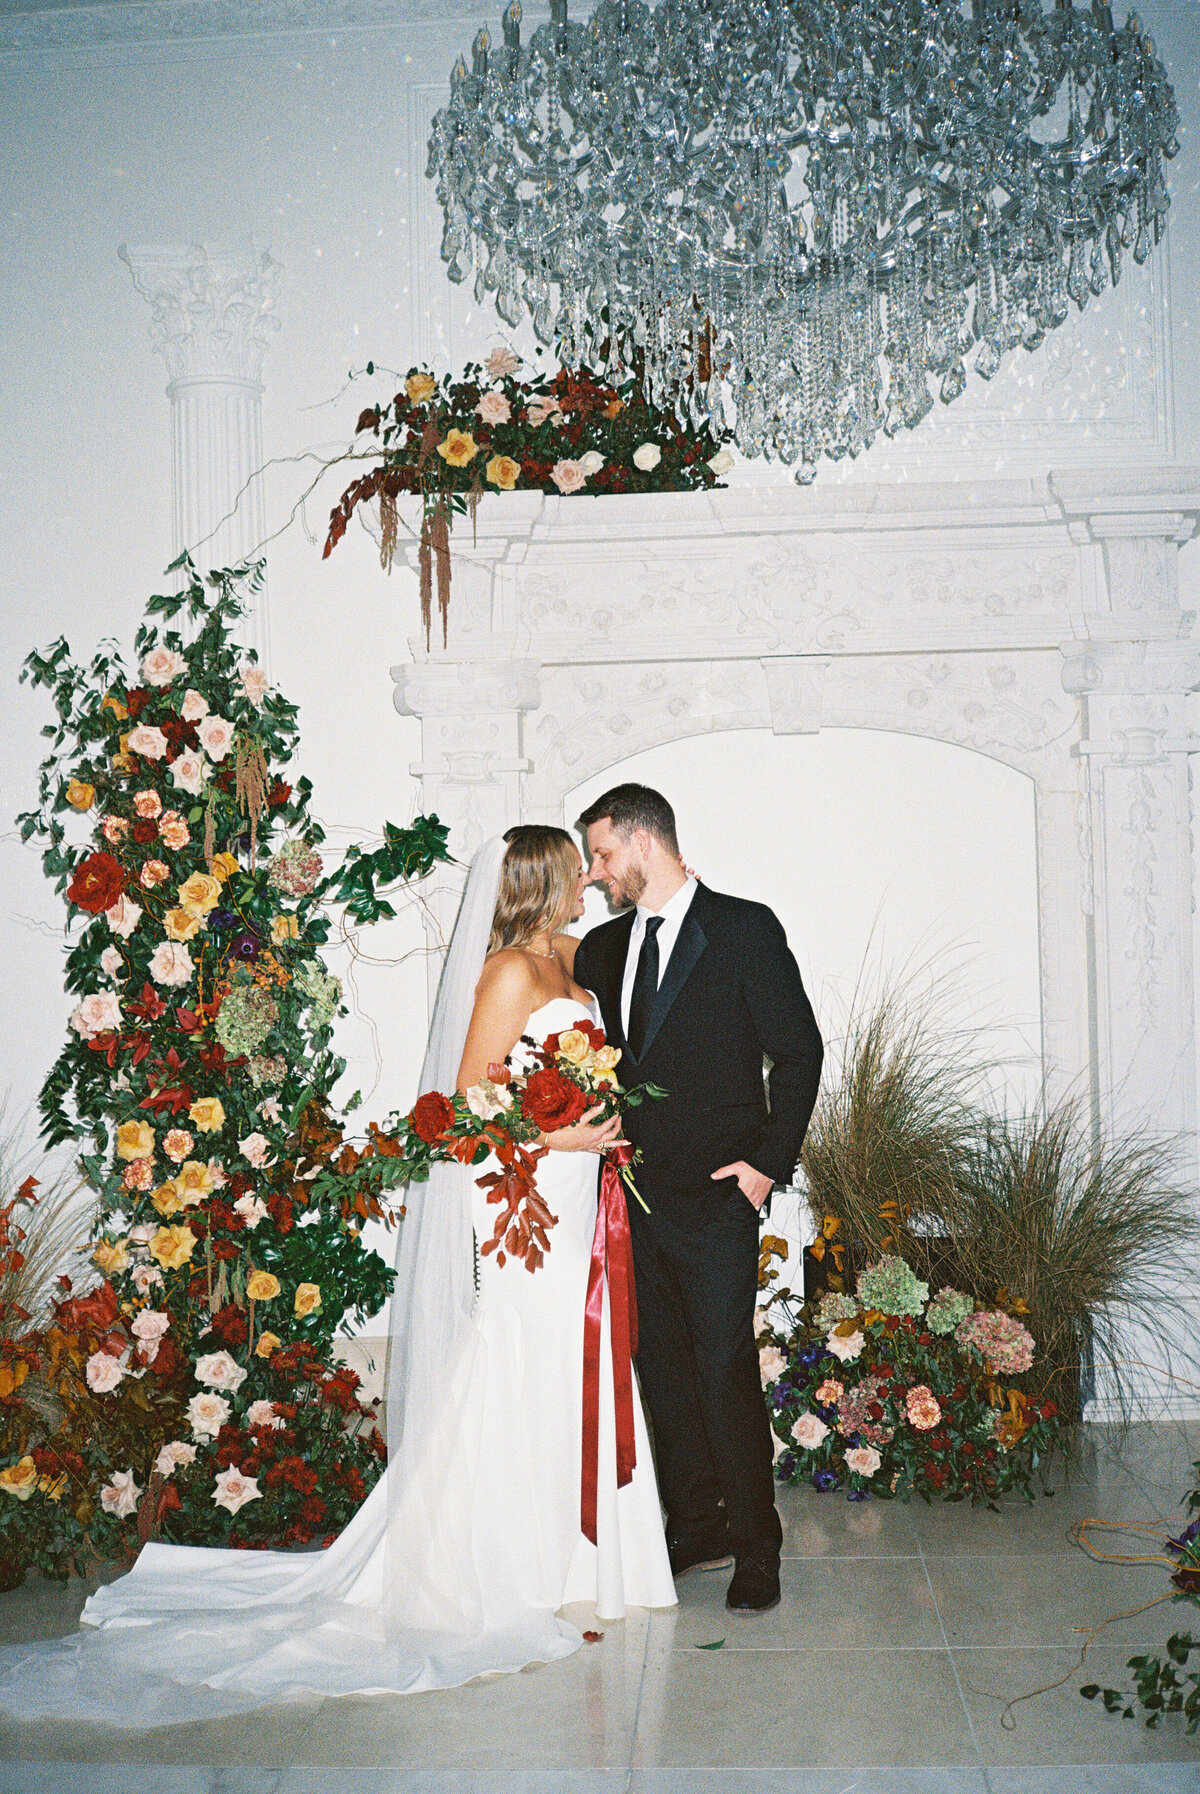 elaborate floral arch at wedding ceremony with bride and groom in black suit